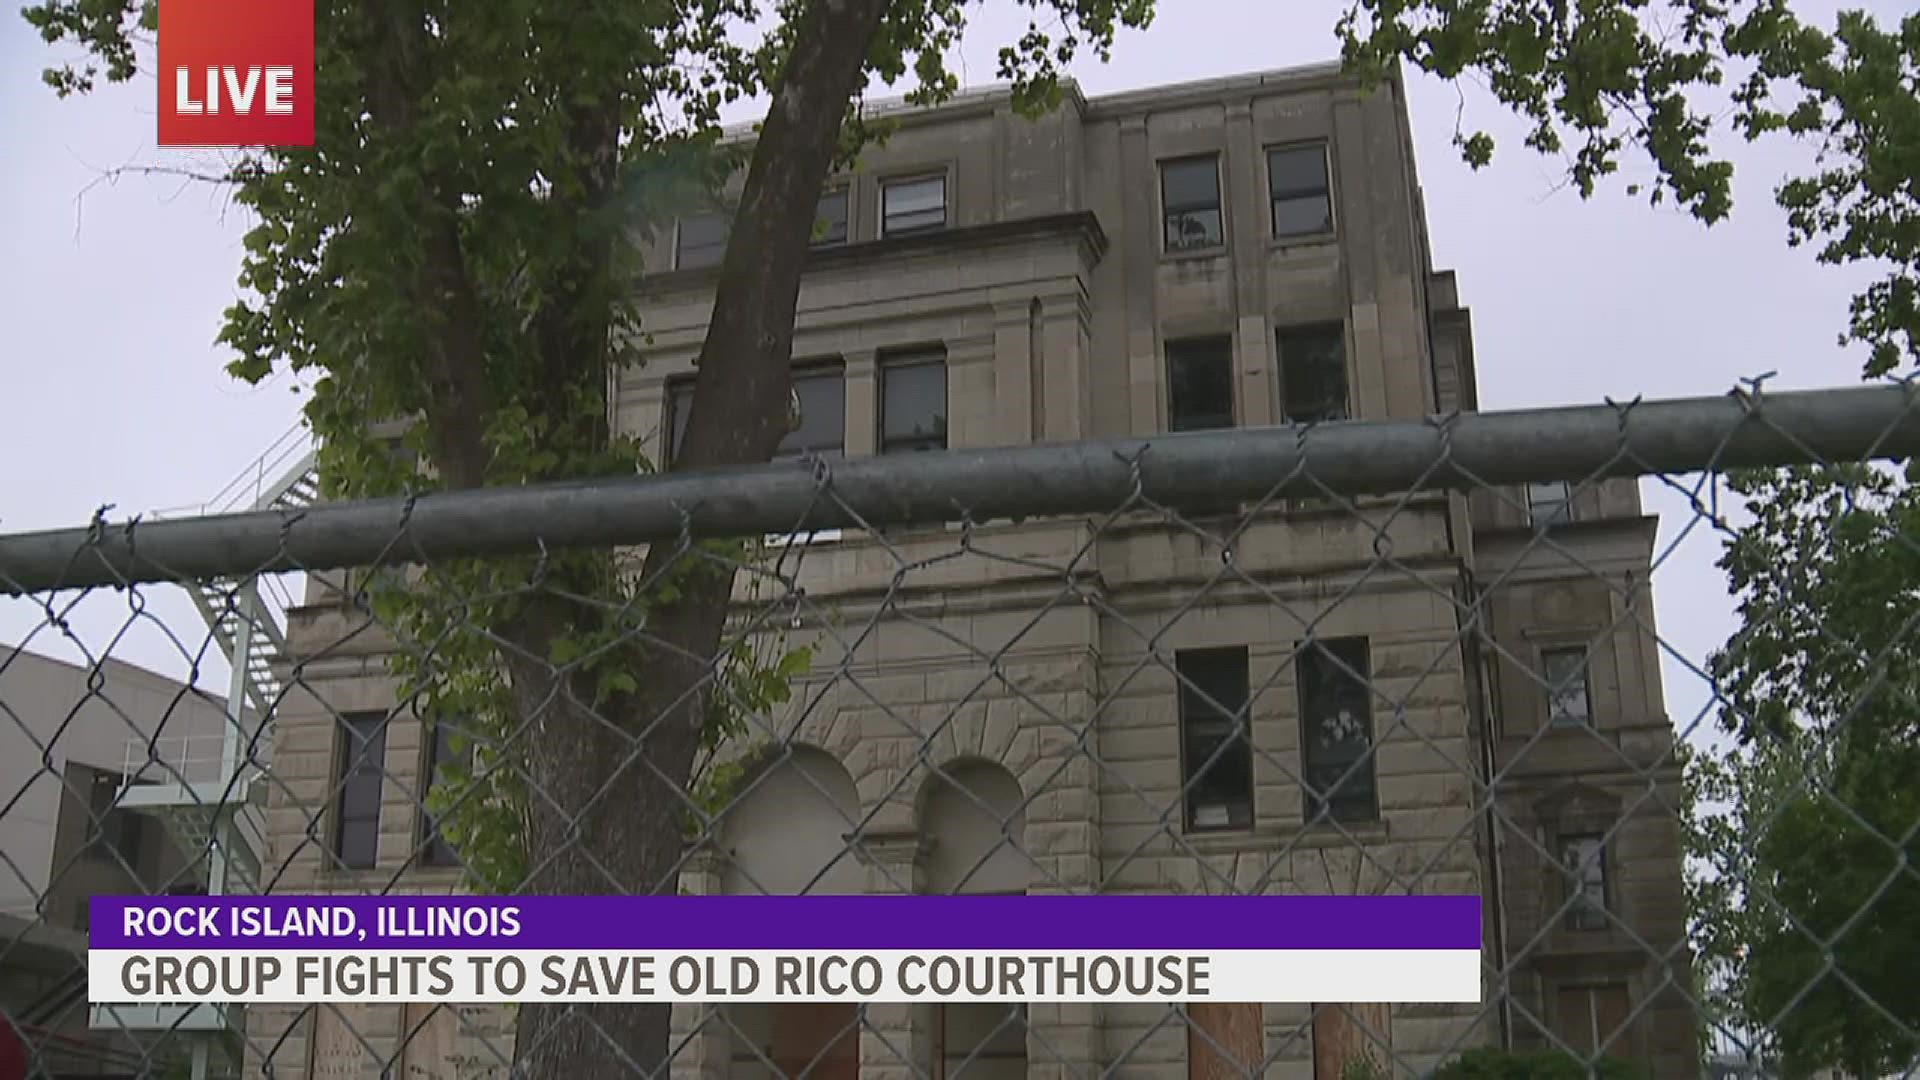 News 8's Jenna Webster was live at the historic courthouse listening to proposals and pleas from community members looking to save the building.